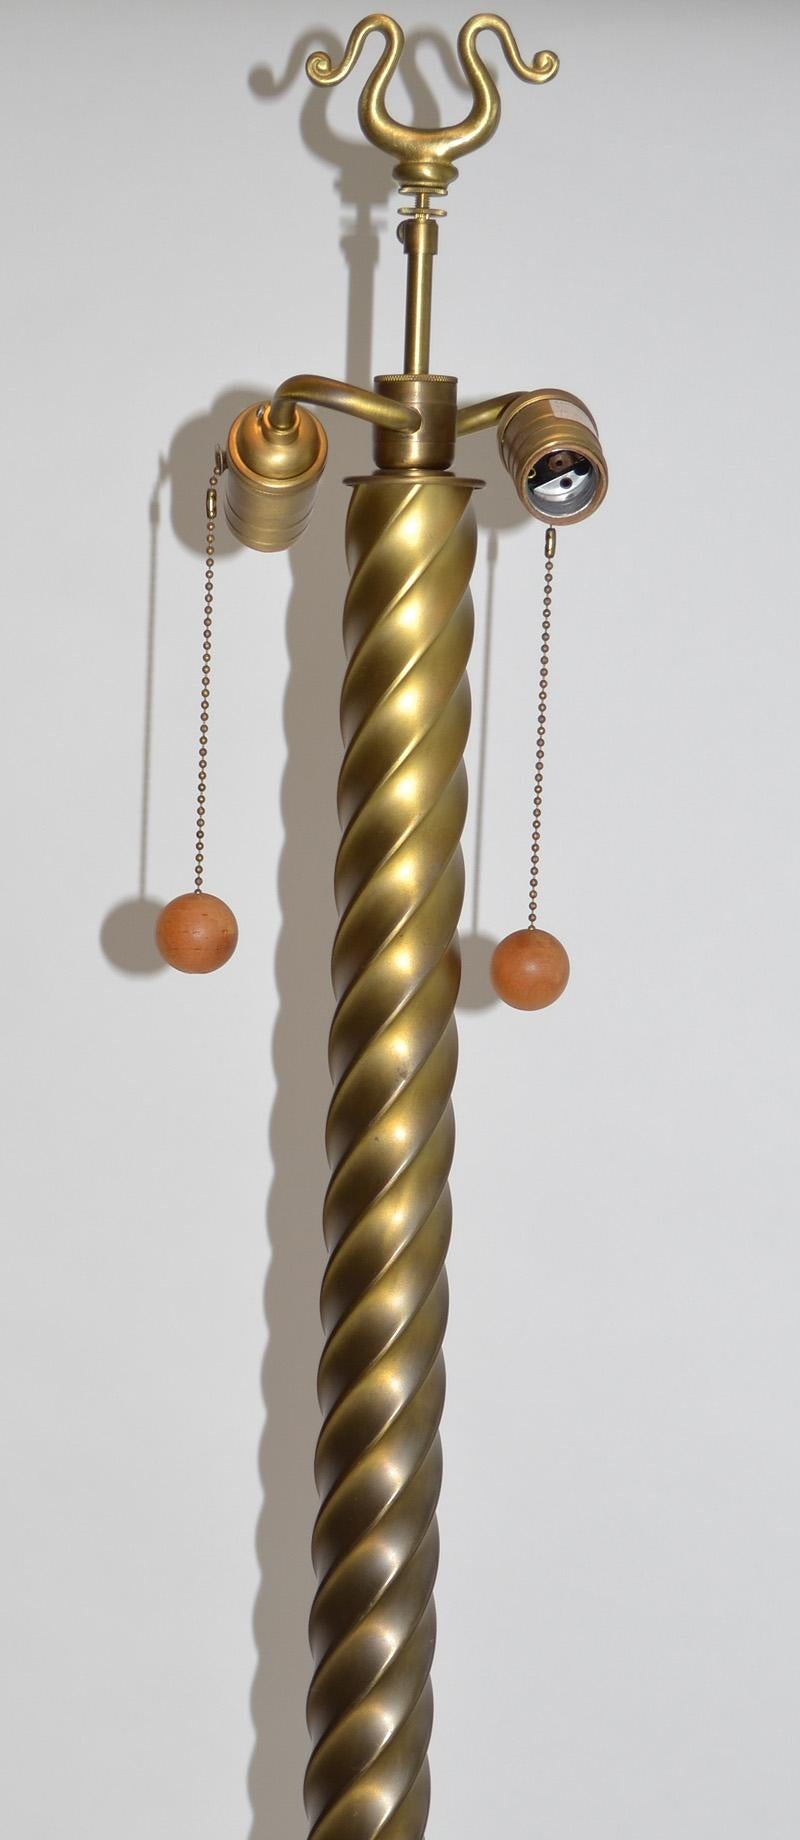 Metal floor lamp by Angelo Donghia c. 1990's. Gloss brass or gold finish. Twisted form with two sockets, square base on ball feet, cloth cord, decorative finial. No shade.